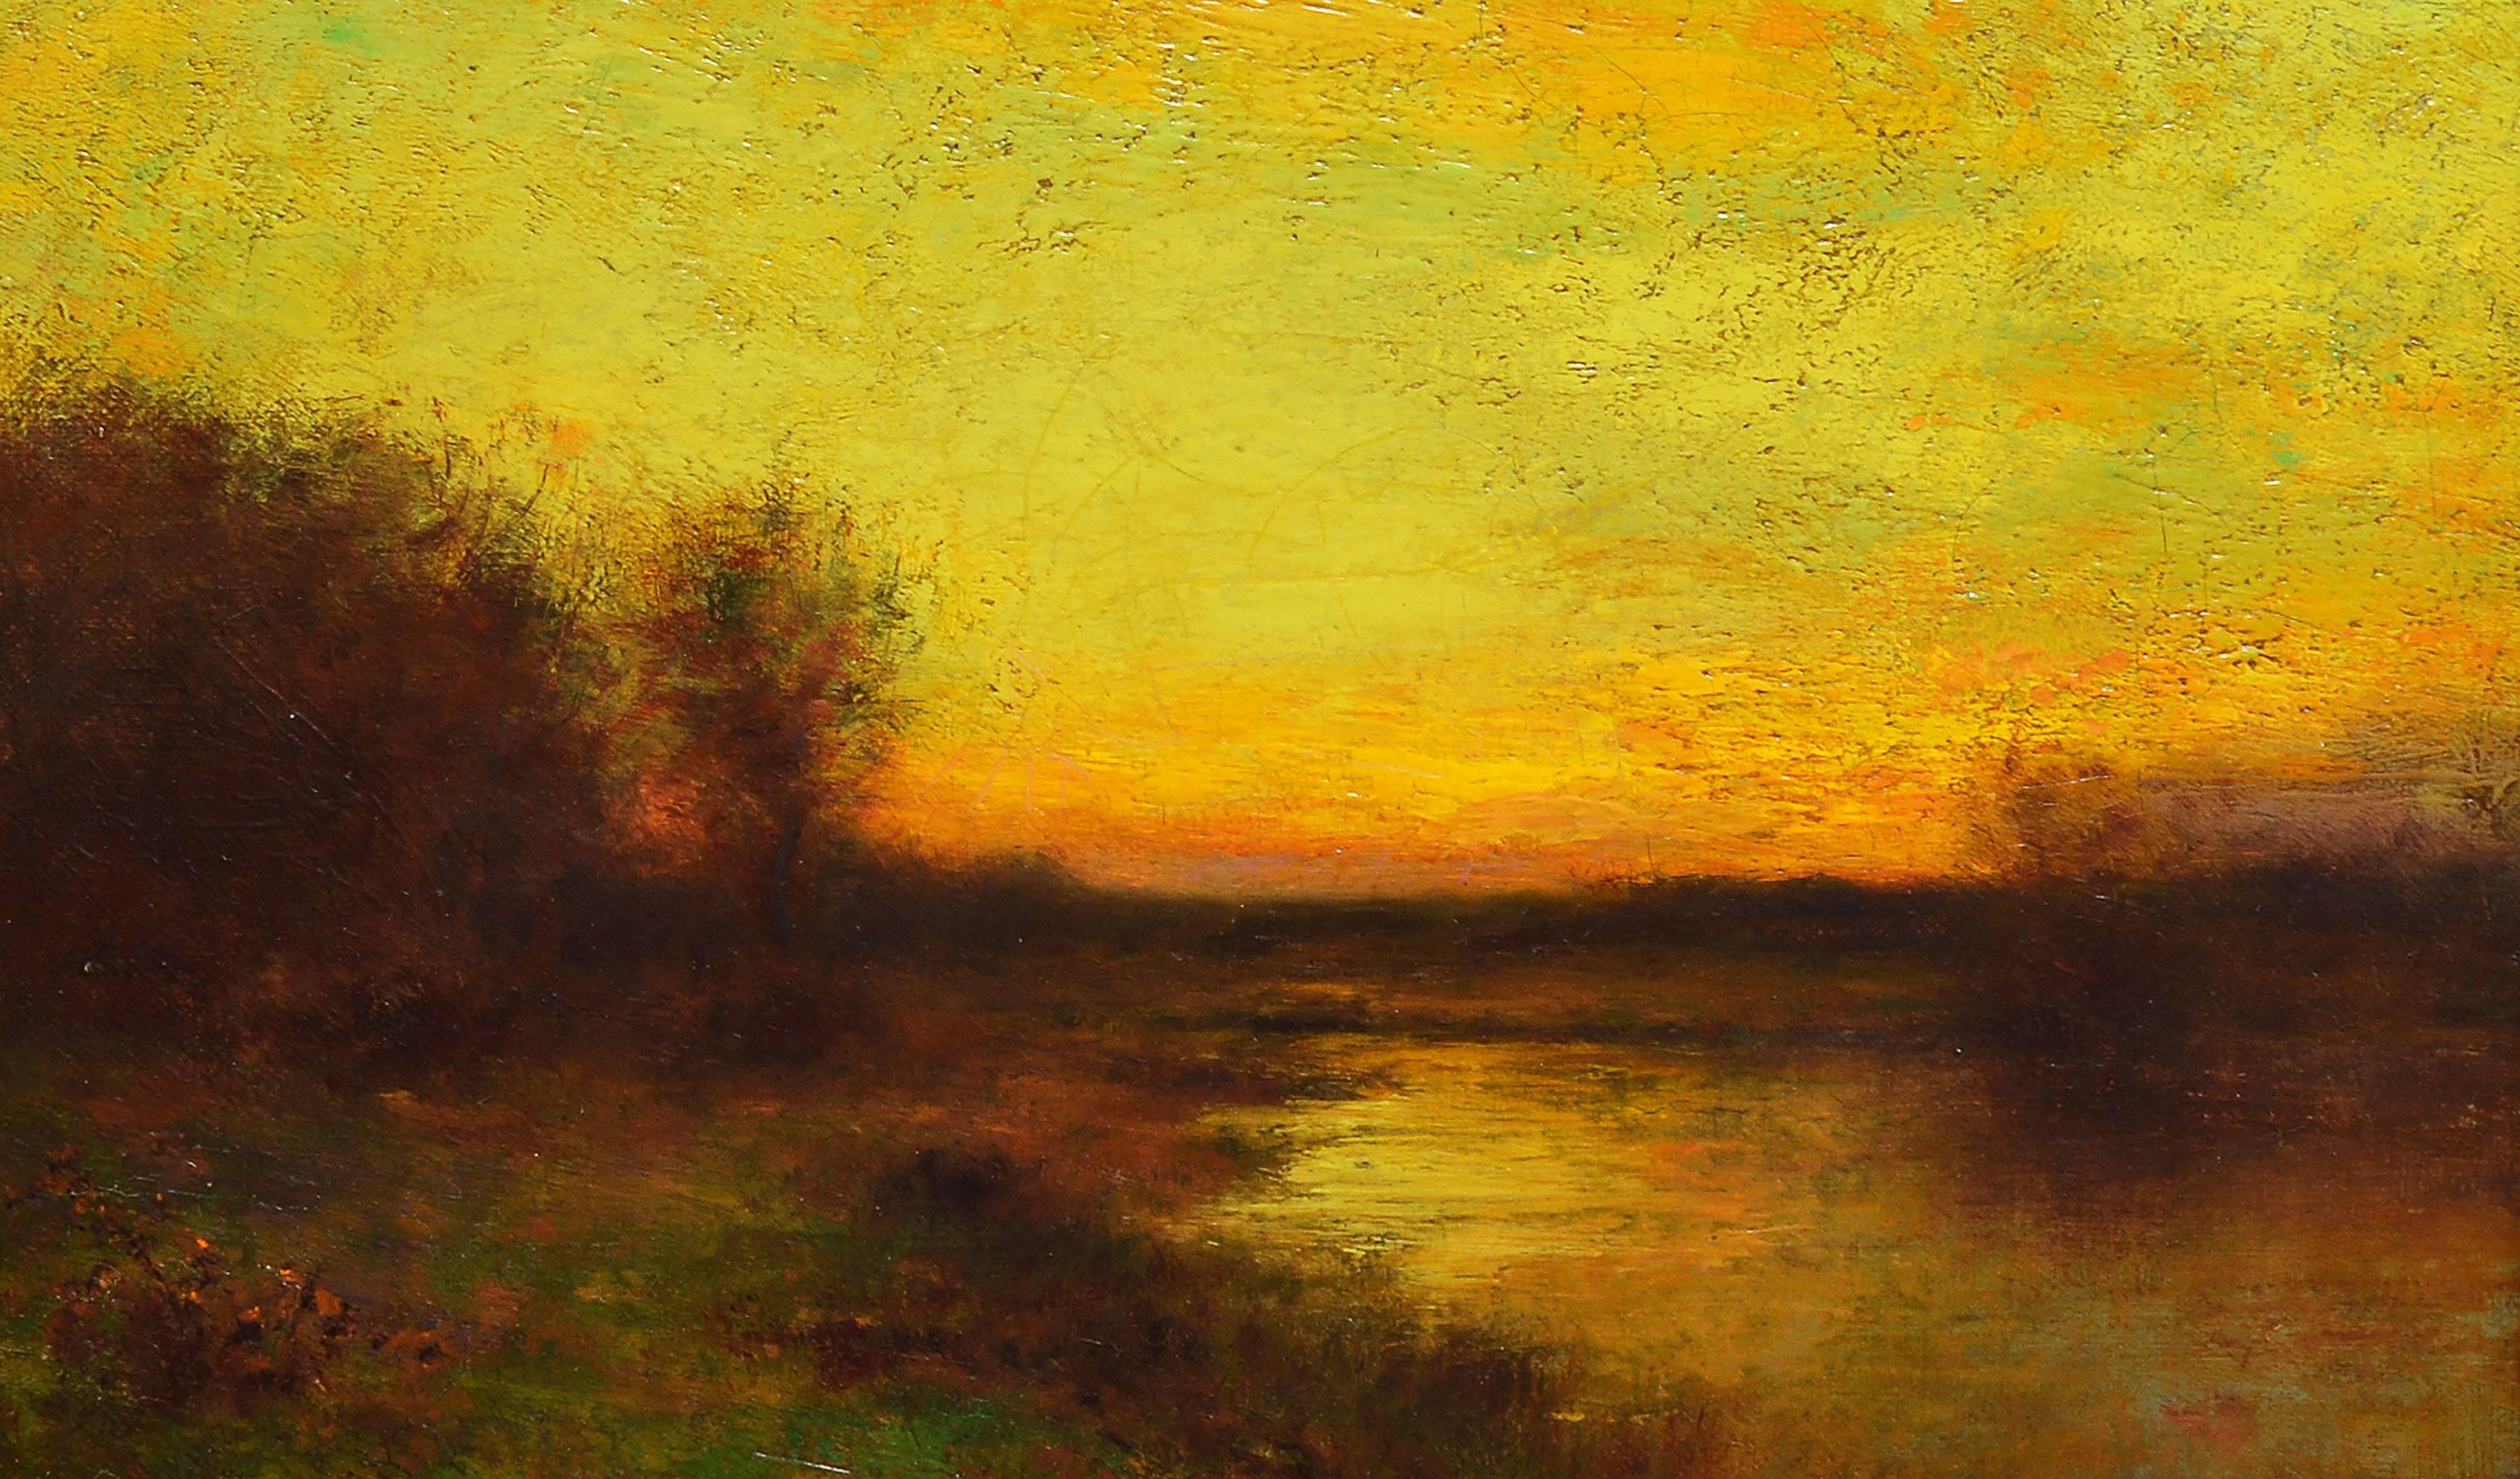 Tonalist sunset landscape by Bruce Crane (1857-1937).  Oil on canvas, circa 1890. Signed lower left, "Bruce Crane".  Displayed in a period giltwood frame.  Image size, 12"L x 9"H, overall 18.5" x 15.5".  Cleaned by Yost